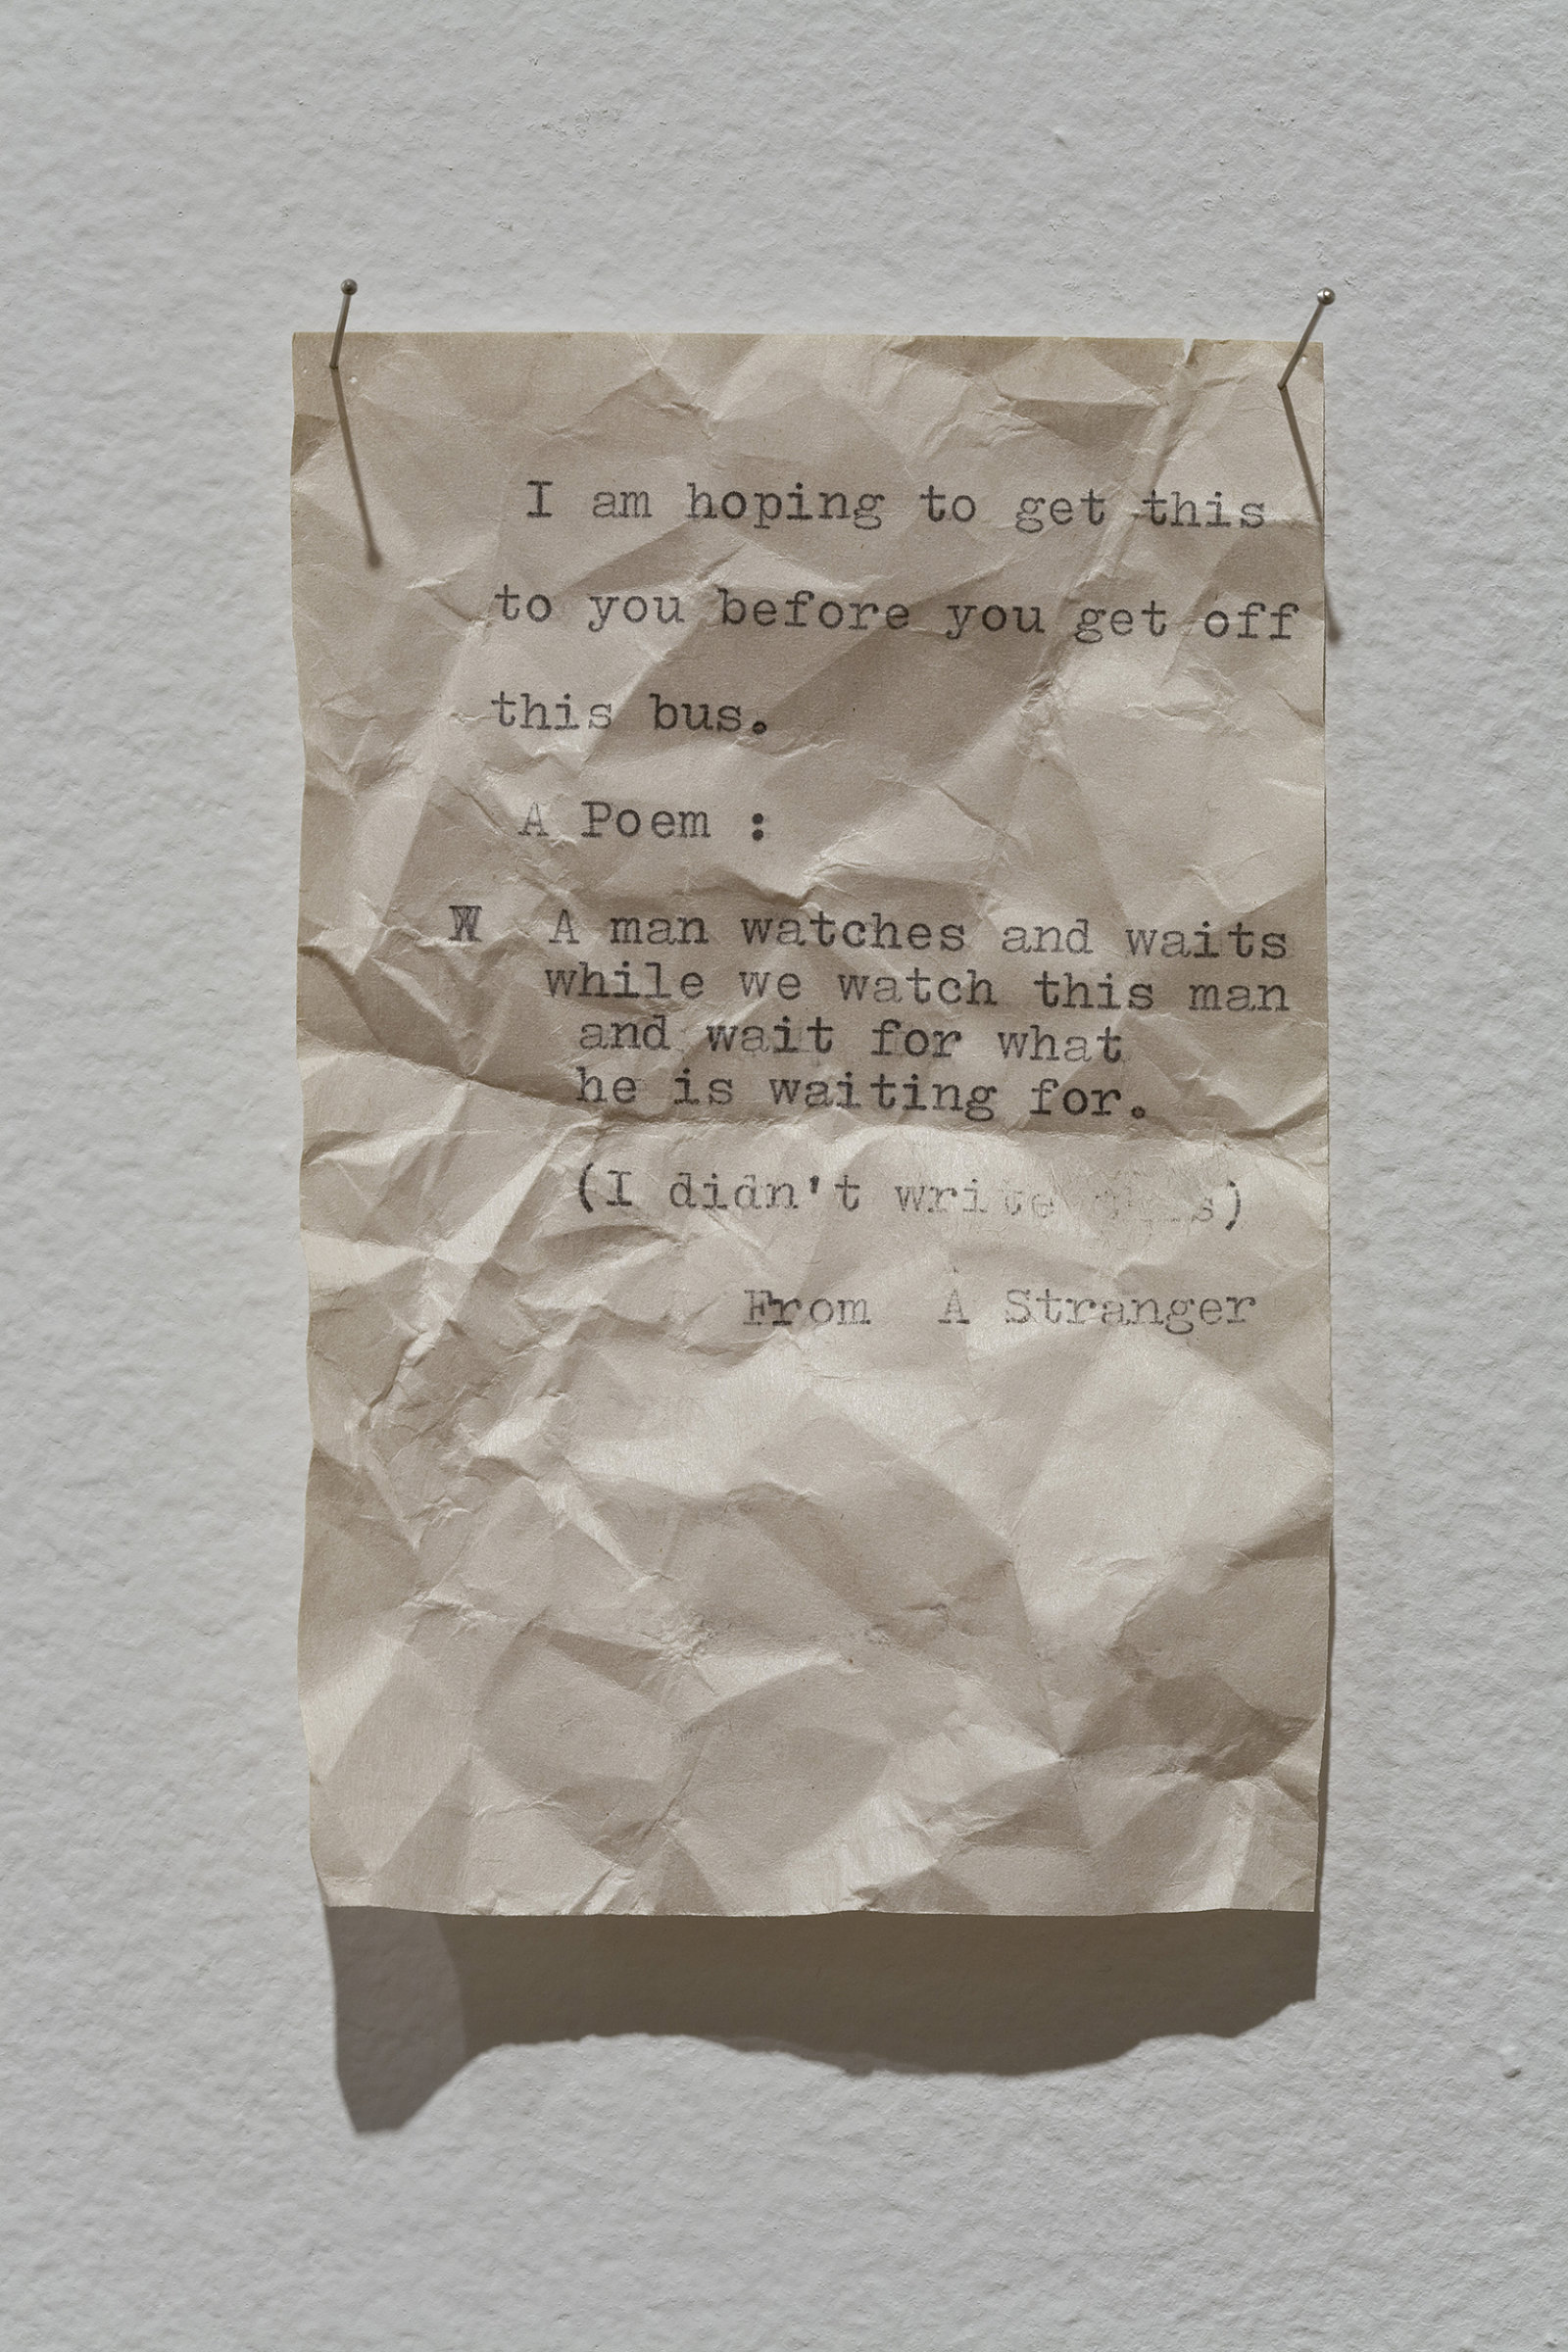 Geoffrey Farmer, Notes For Strangers, 1989–1990, small typewriter, 6 typewritten notes on paper, transfer ticket, shelf with plexiglass top, dimensions variable